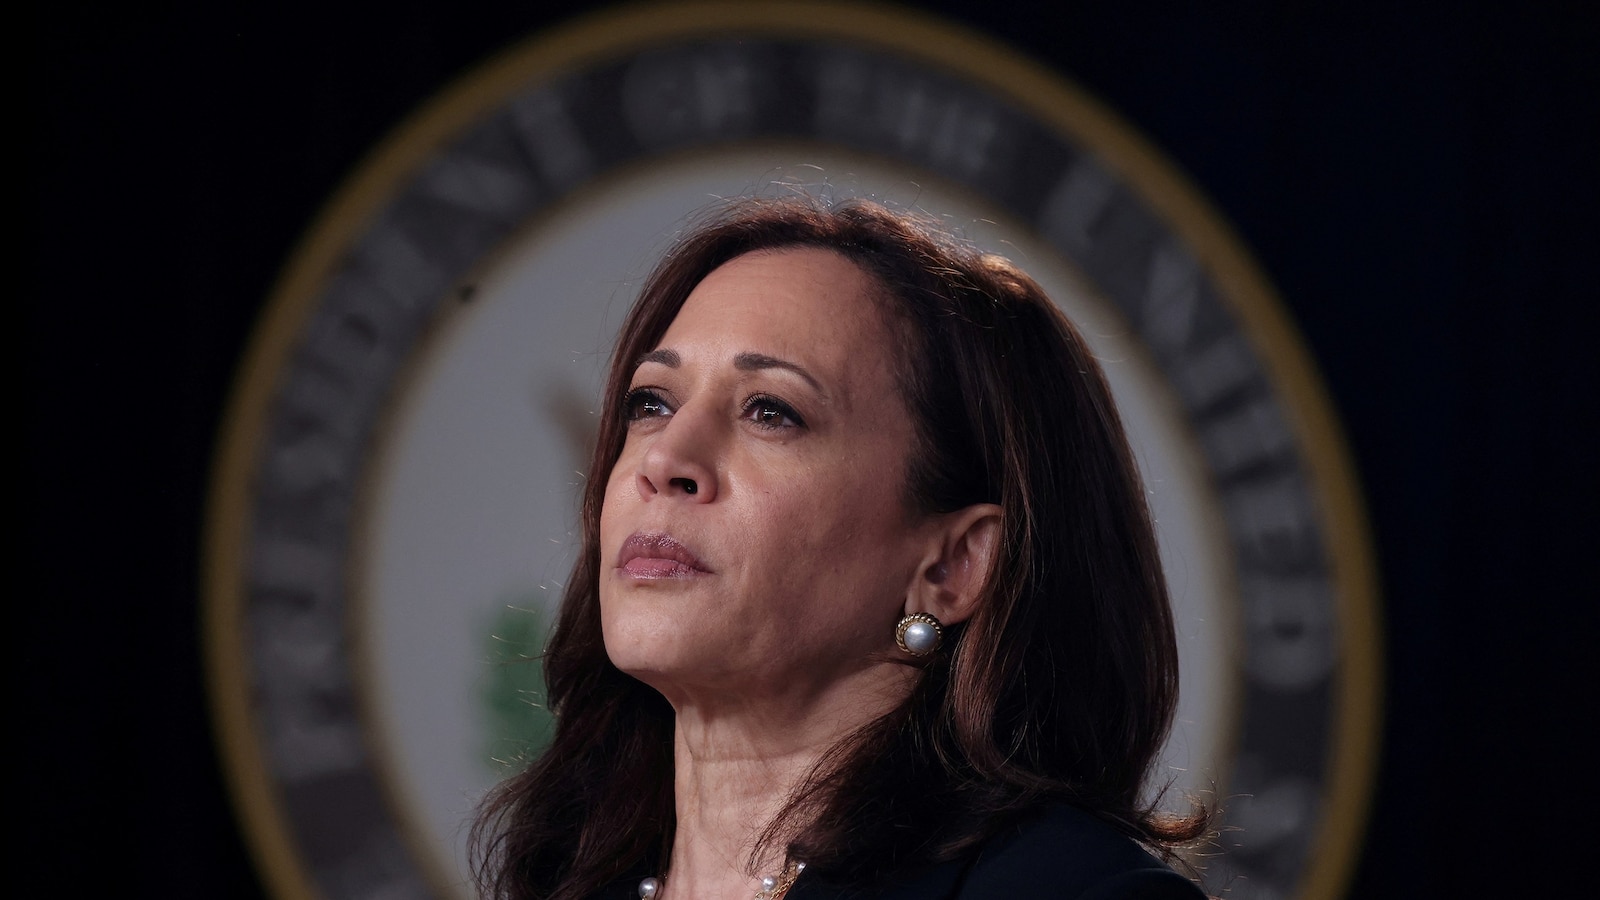 As Kamala Harris campaigns for presidency, where she stands on health care issues